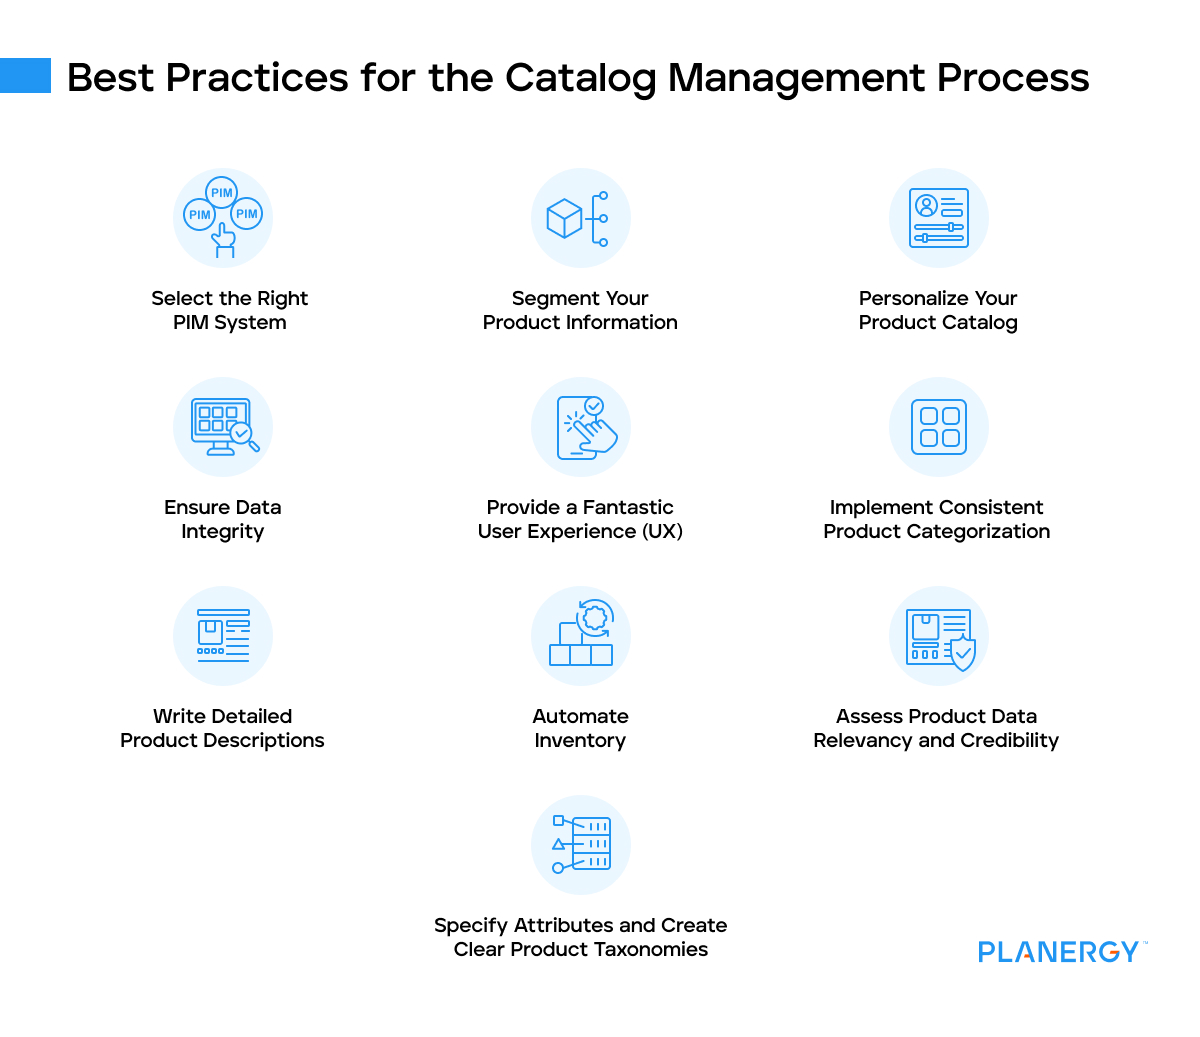 Best practices for the catalog management process